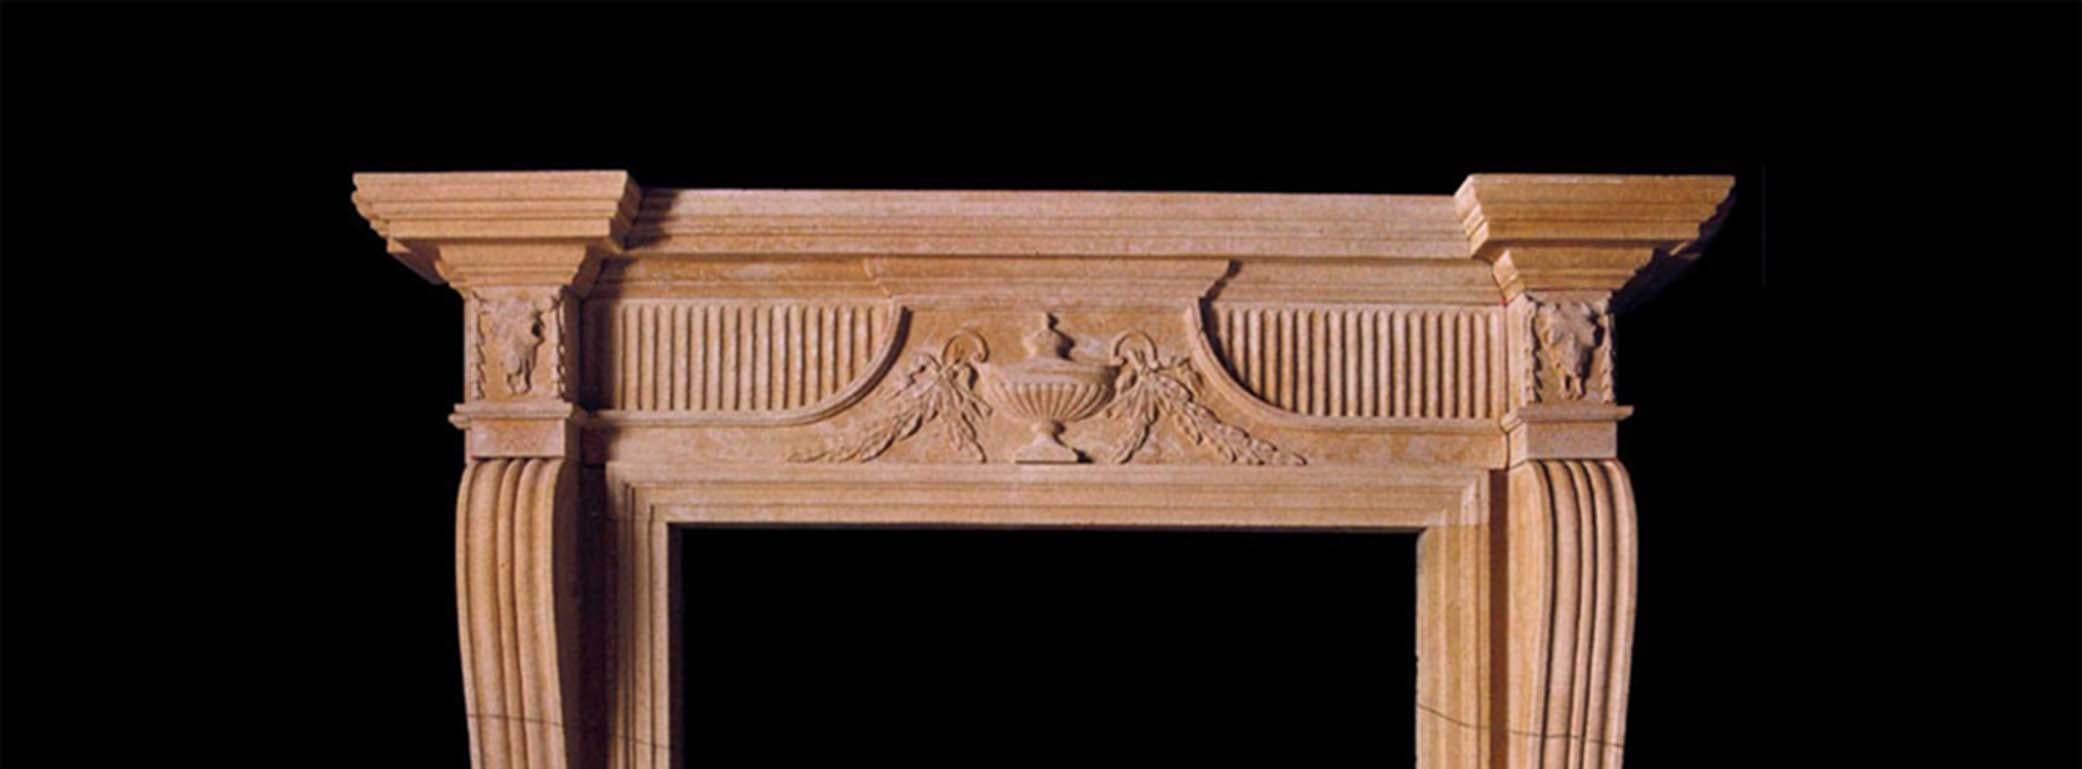 Late 18th Century Bathstone Mantel In Good Condition For Sale In New York, NY